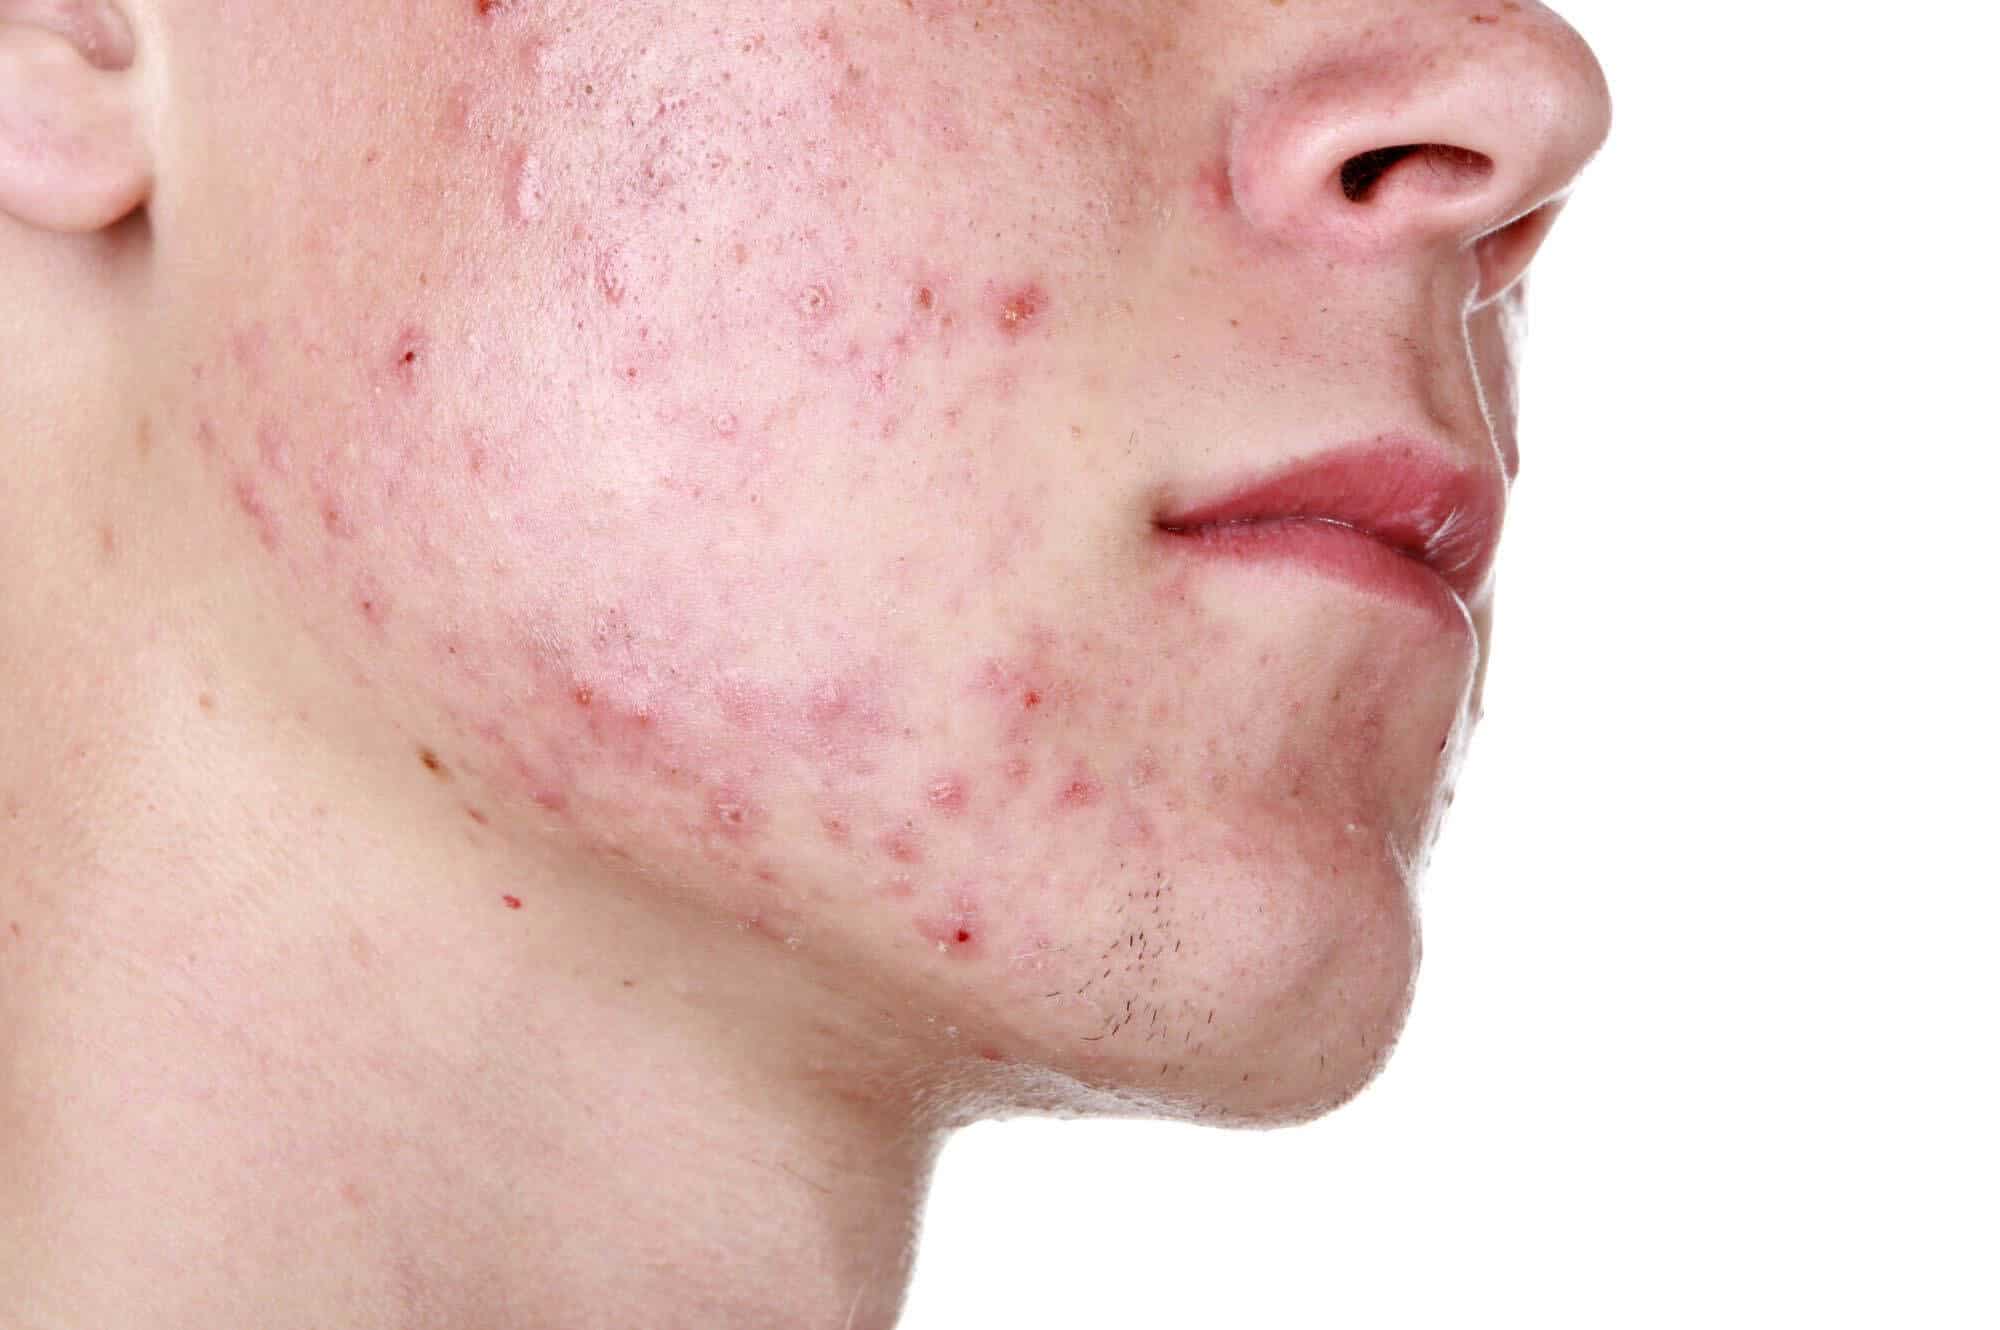 How to Get Clear Skin & Prevent Acne - Skincare Tips for Men